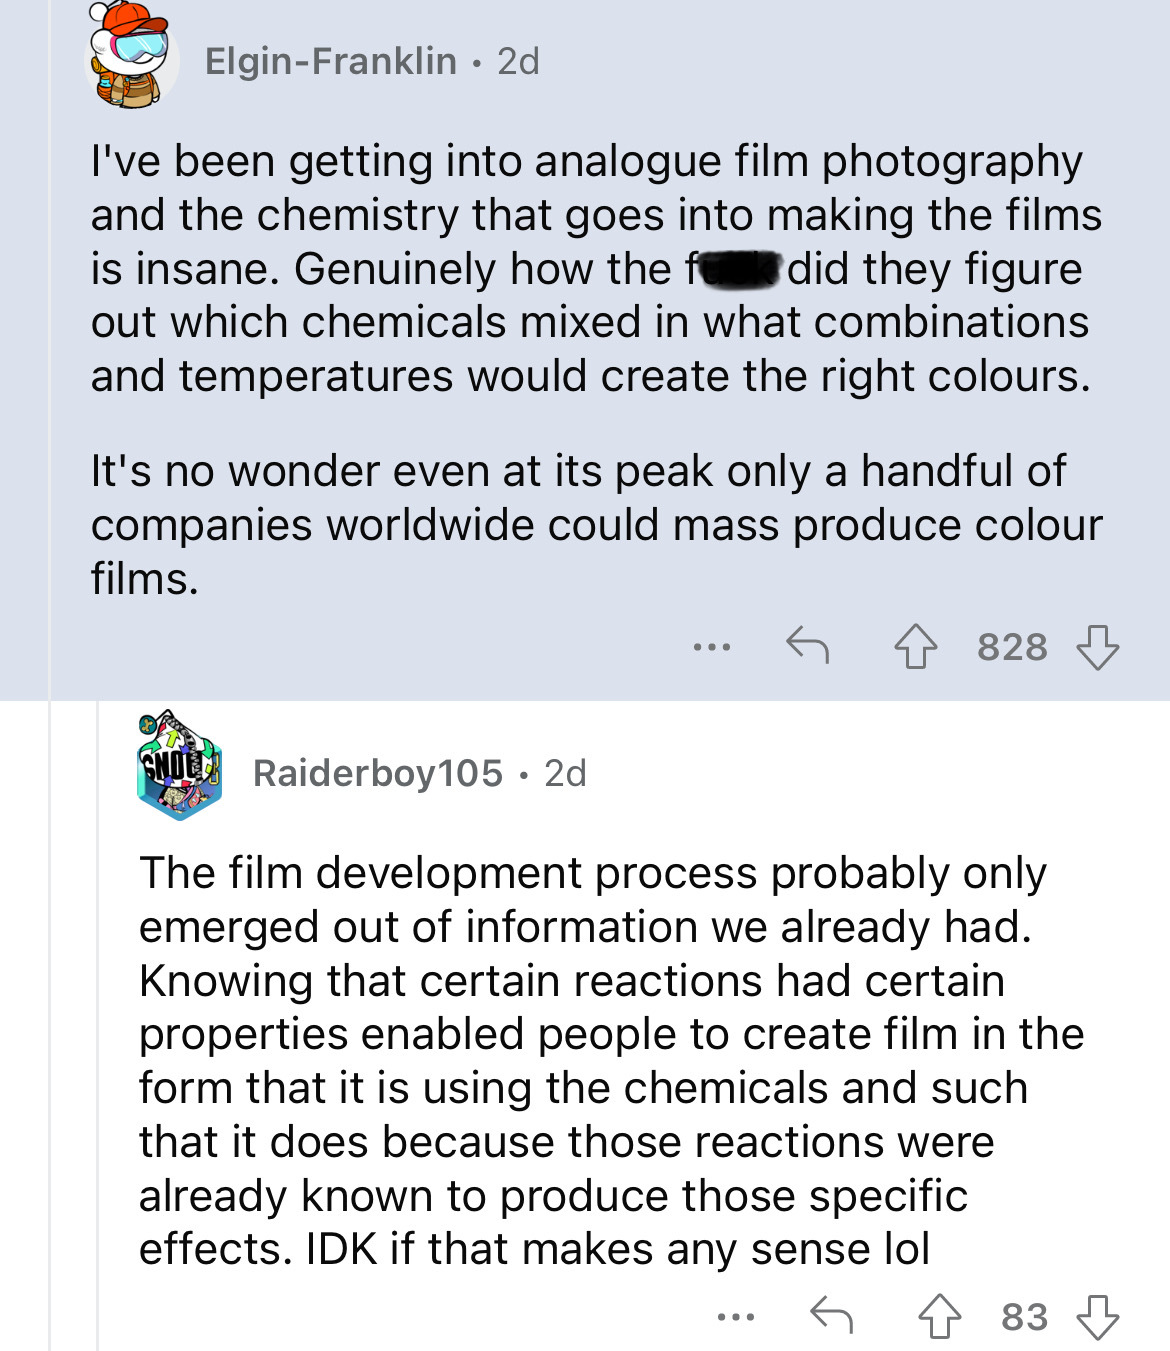 screenshot - ElginFranklin 2d I've been getting into analogue film photography and the chemistry that goes into making the films is insane. Genuinely how the f did they figure out which chemicals mixed in what combinations and temperatures would create th